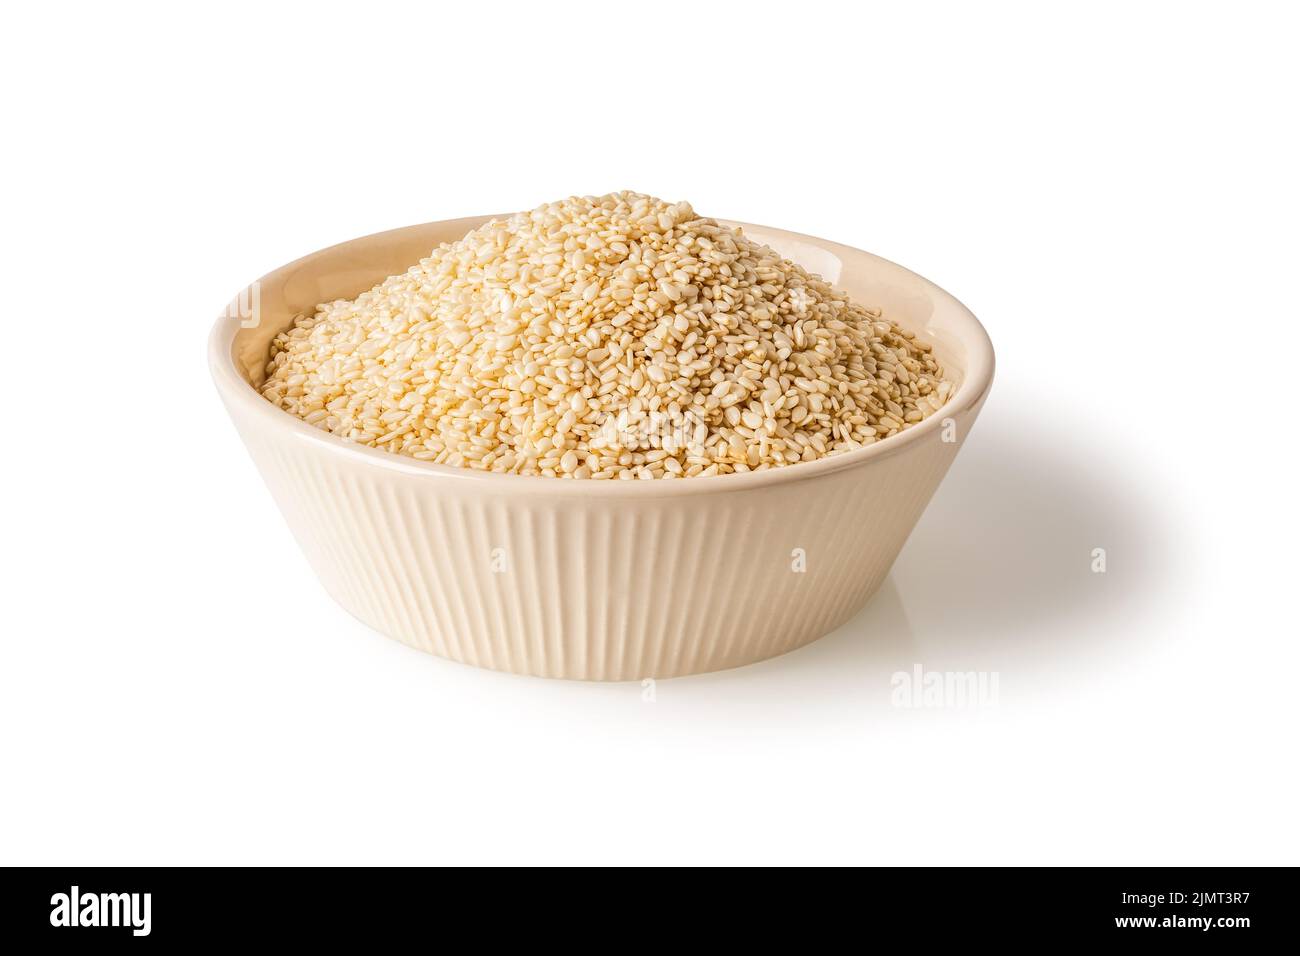 White sesame seeds in a beige bowl isolated on a white background. Heap of organic til grains on a plate cutout. Sesamum indicum for healthy eating. Stock Photo